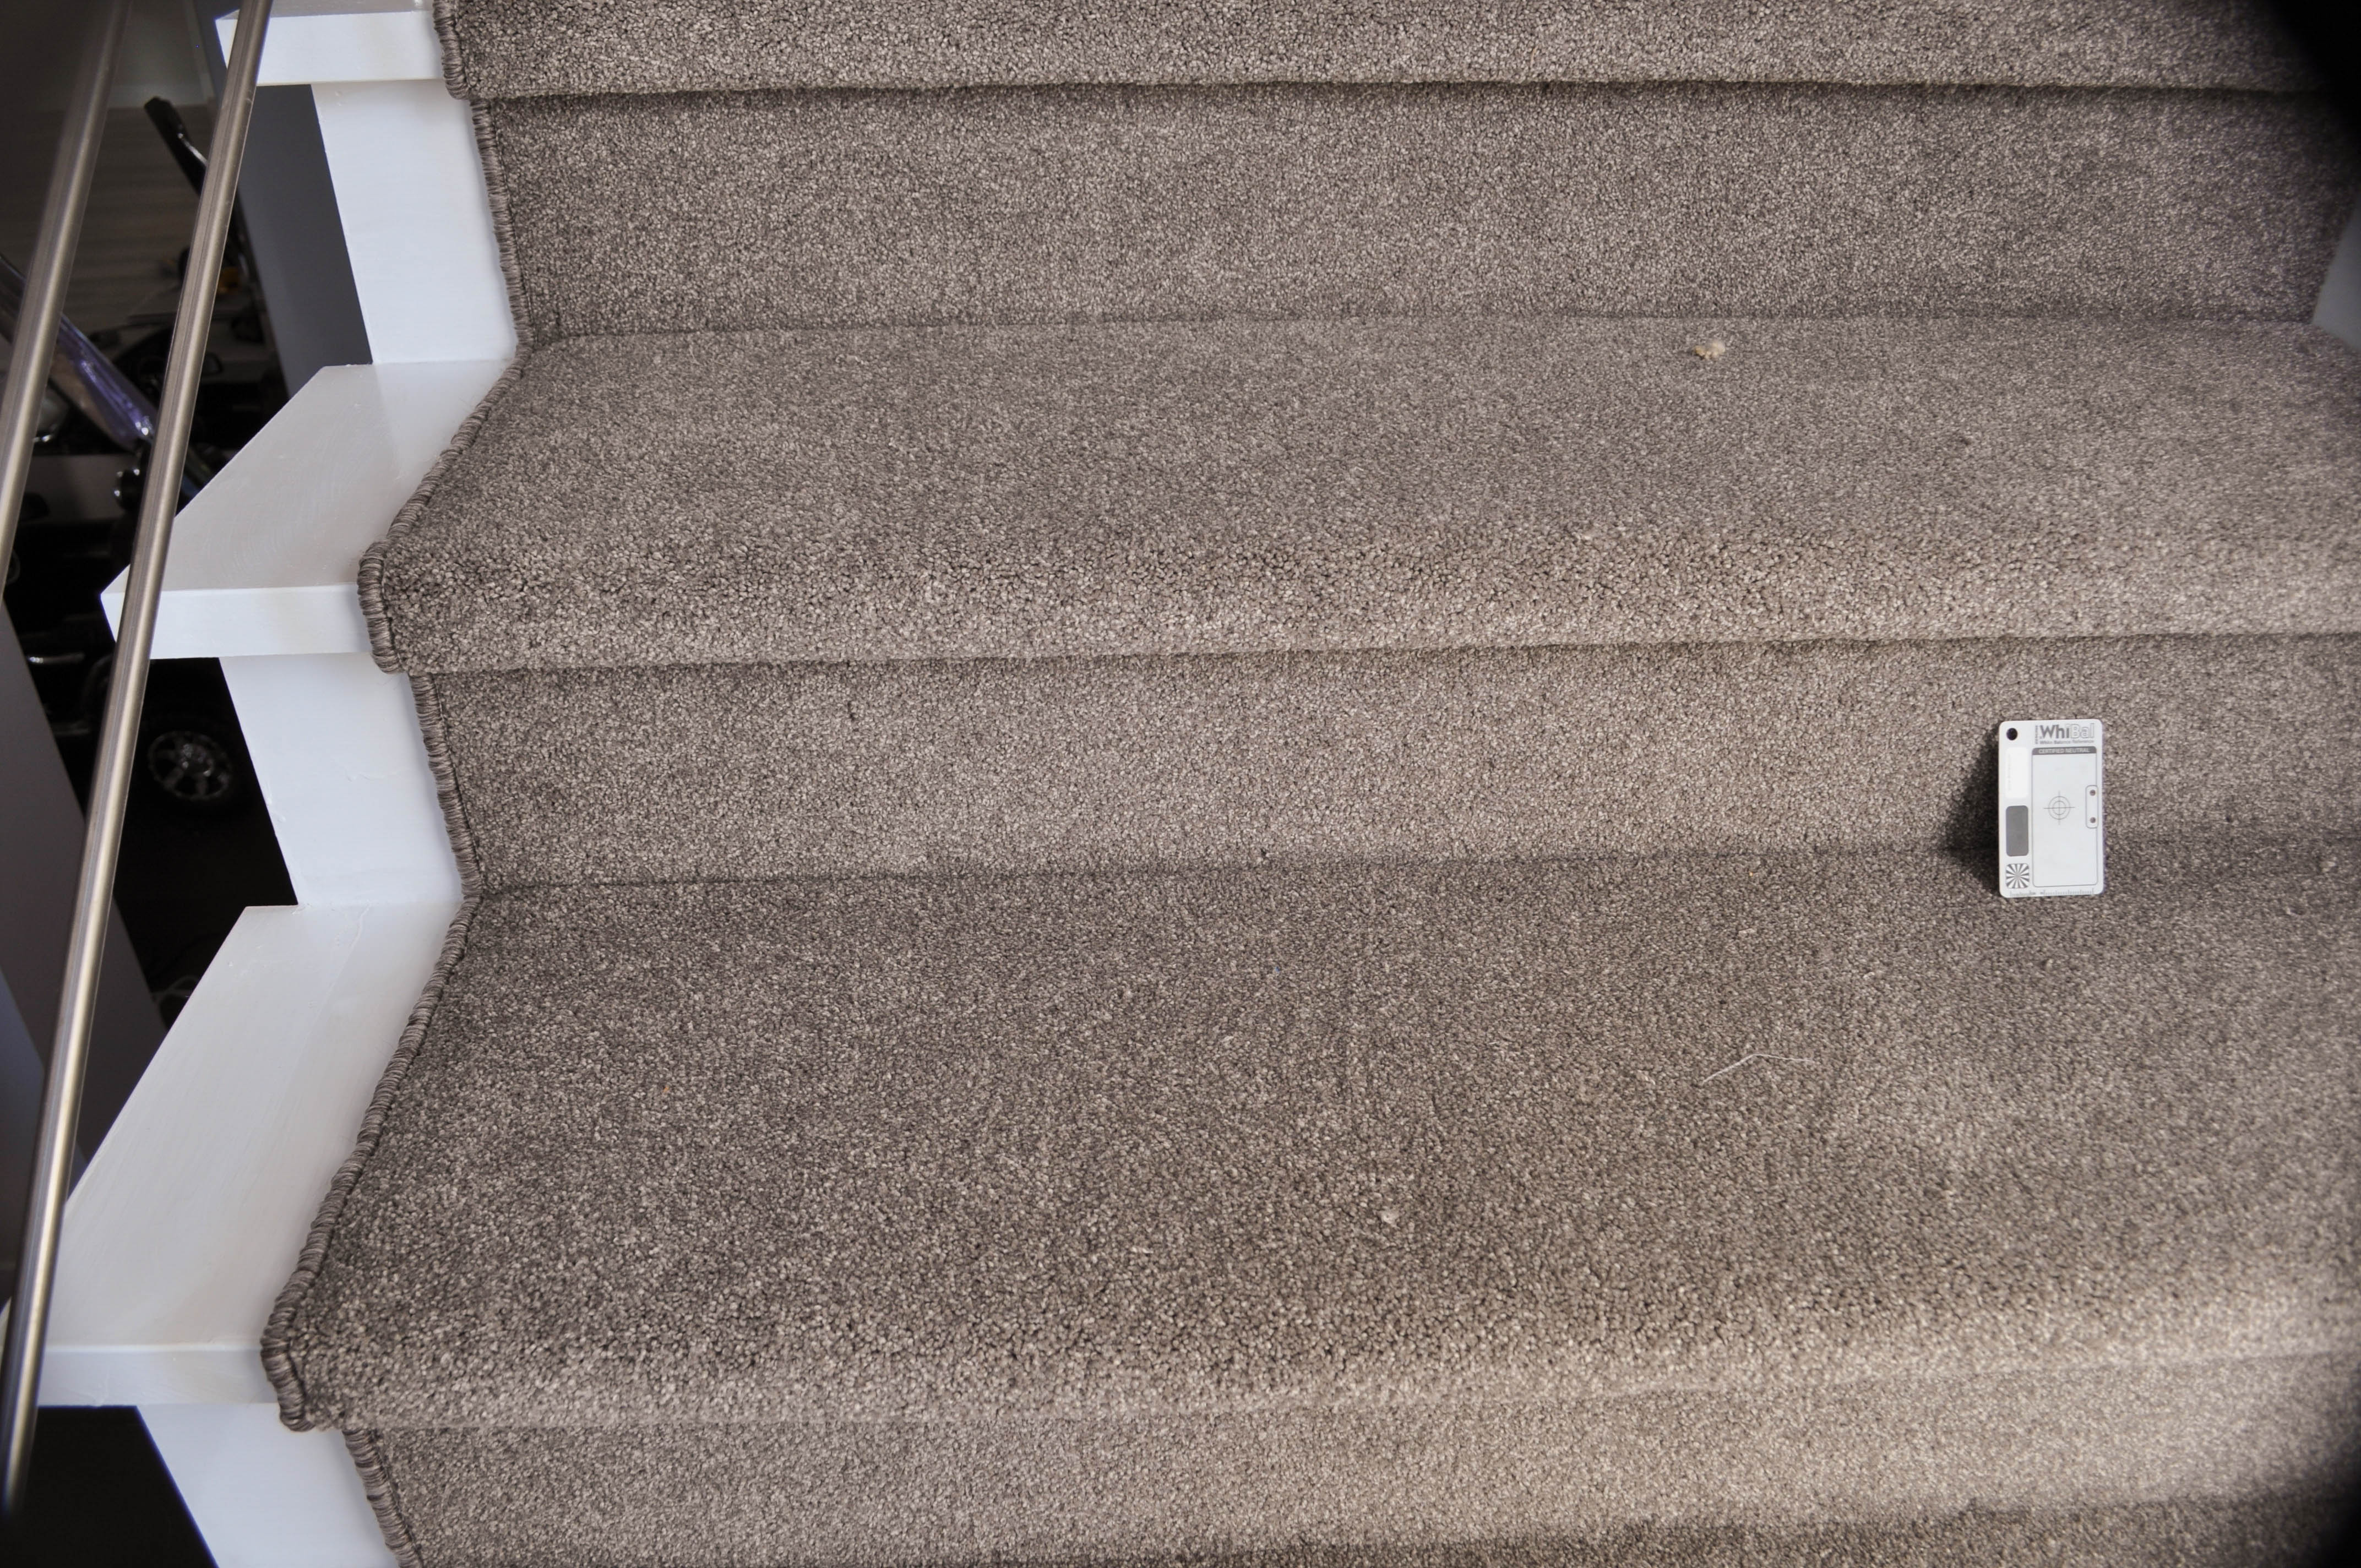 showing a staircase in which the carpet installer Concord floors installed a twist pile carpet of a beige color, which has a rating of extra heavy duty including stairs.